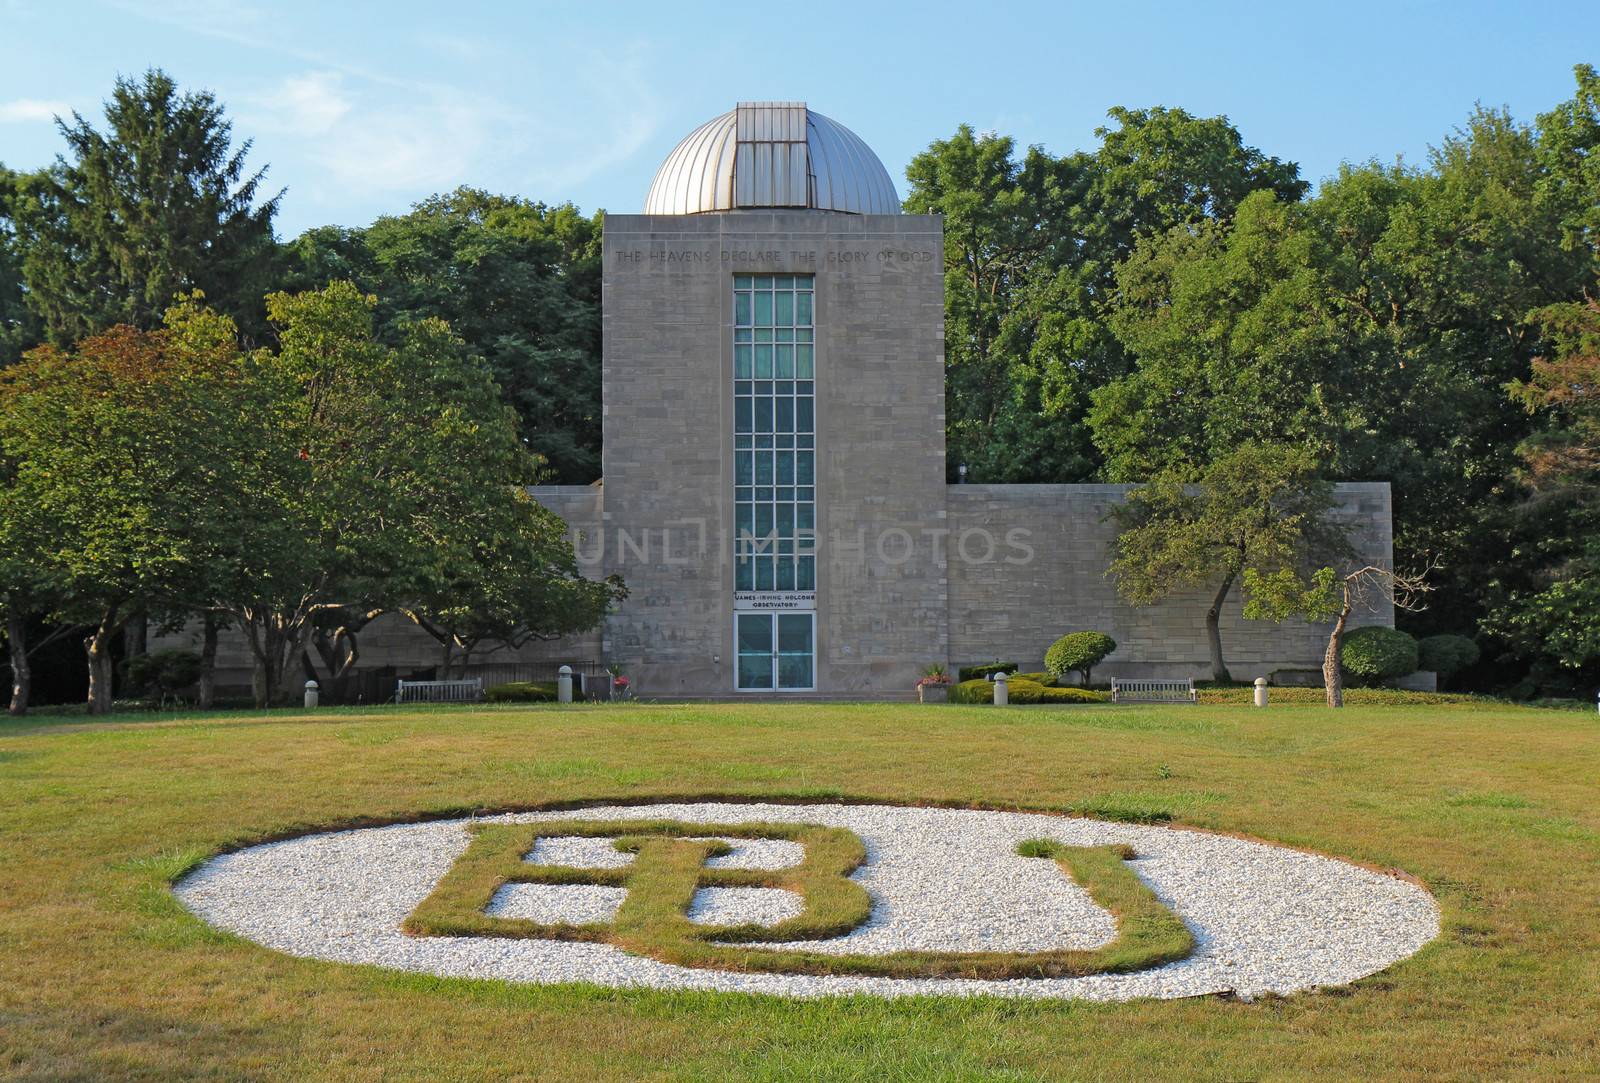 INDIANAPOLIS, INDIANA - JULY 30: Holcomb Observatory and Planetarium at Butler University, July 30, 2011. The building houses a 38-inch telescope, one of the largest public observatories in the world.